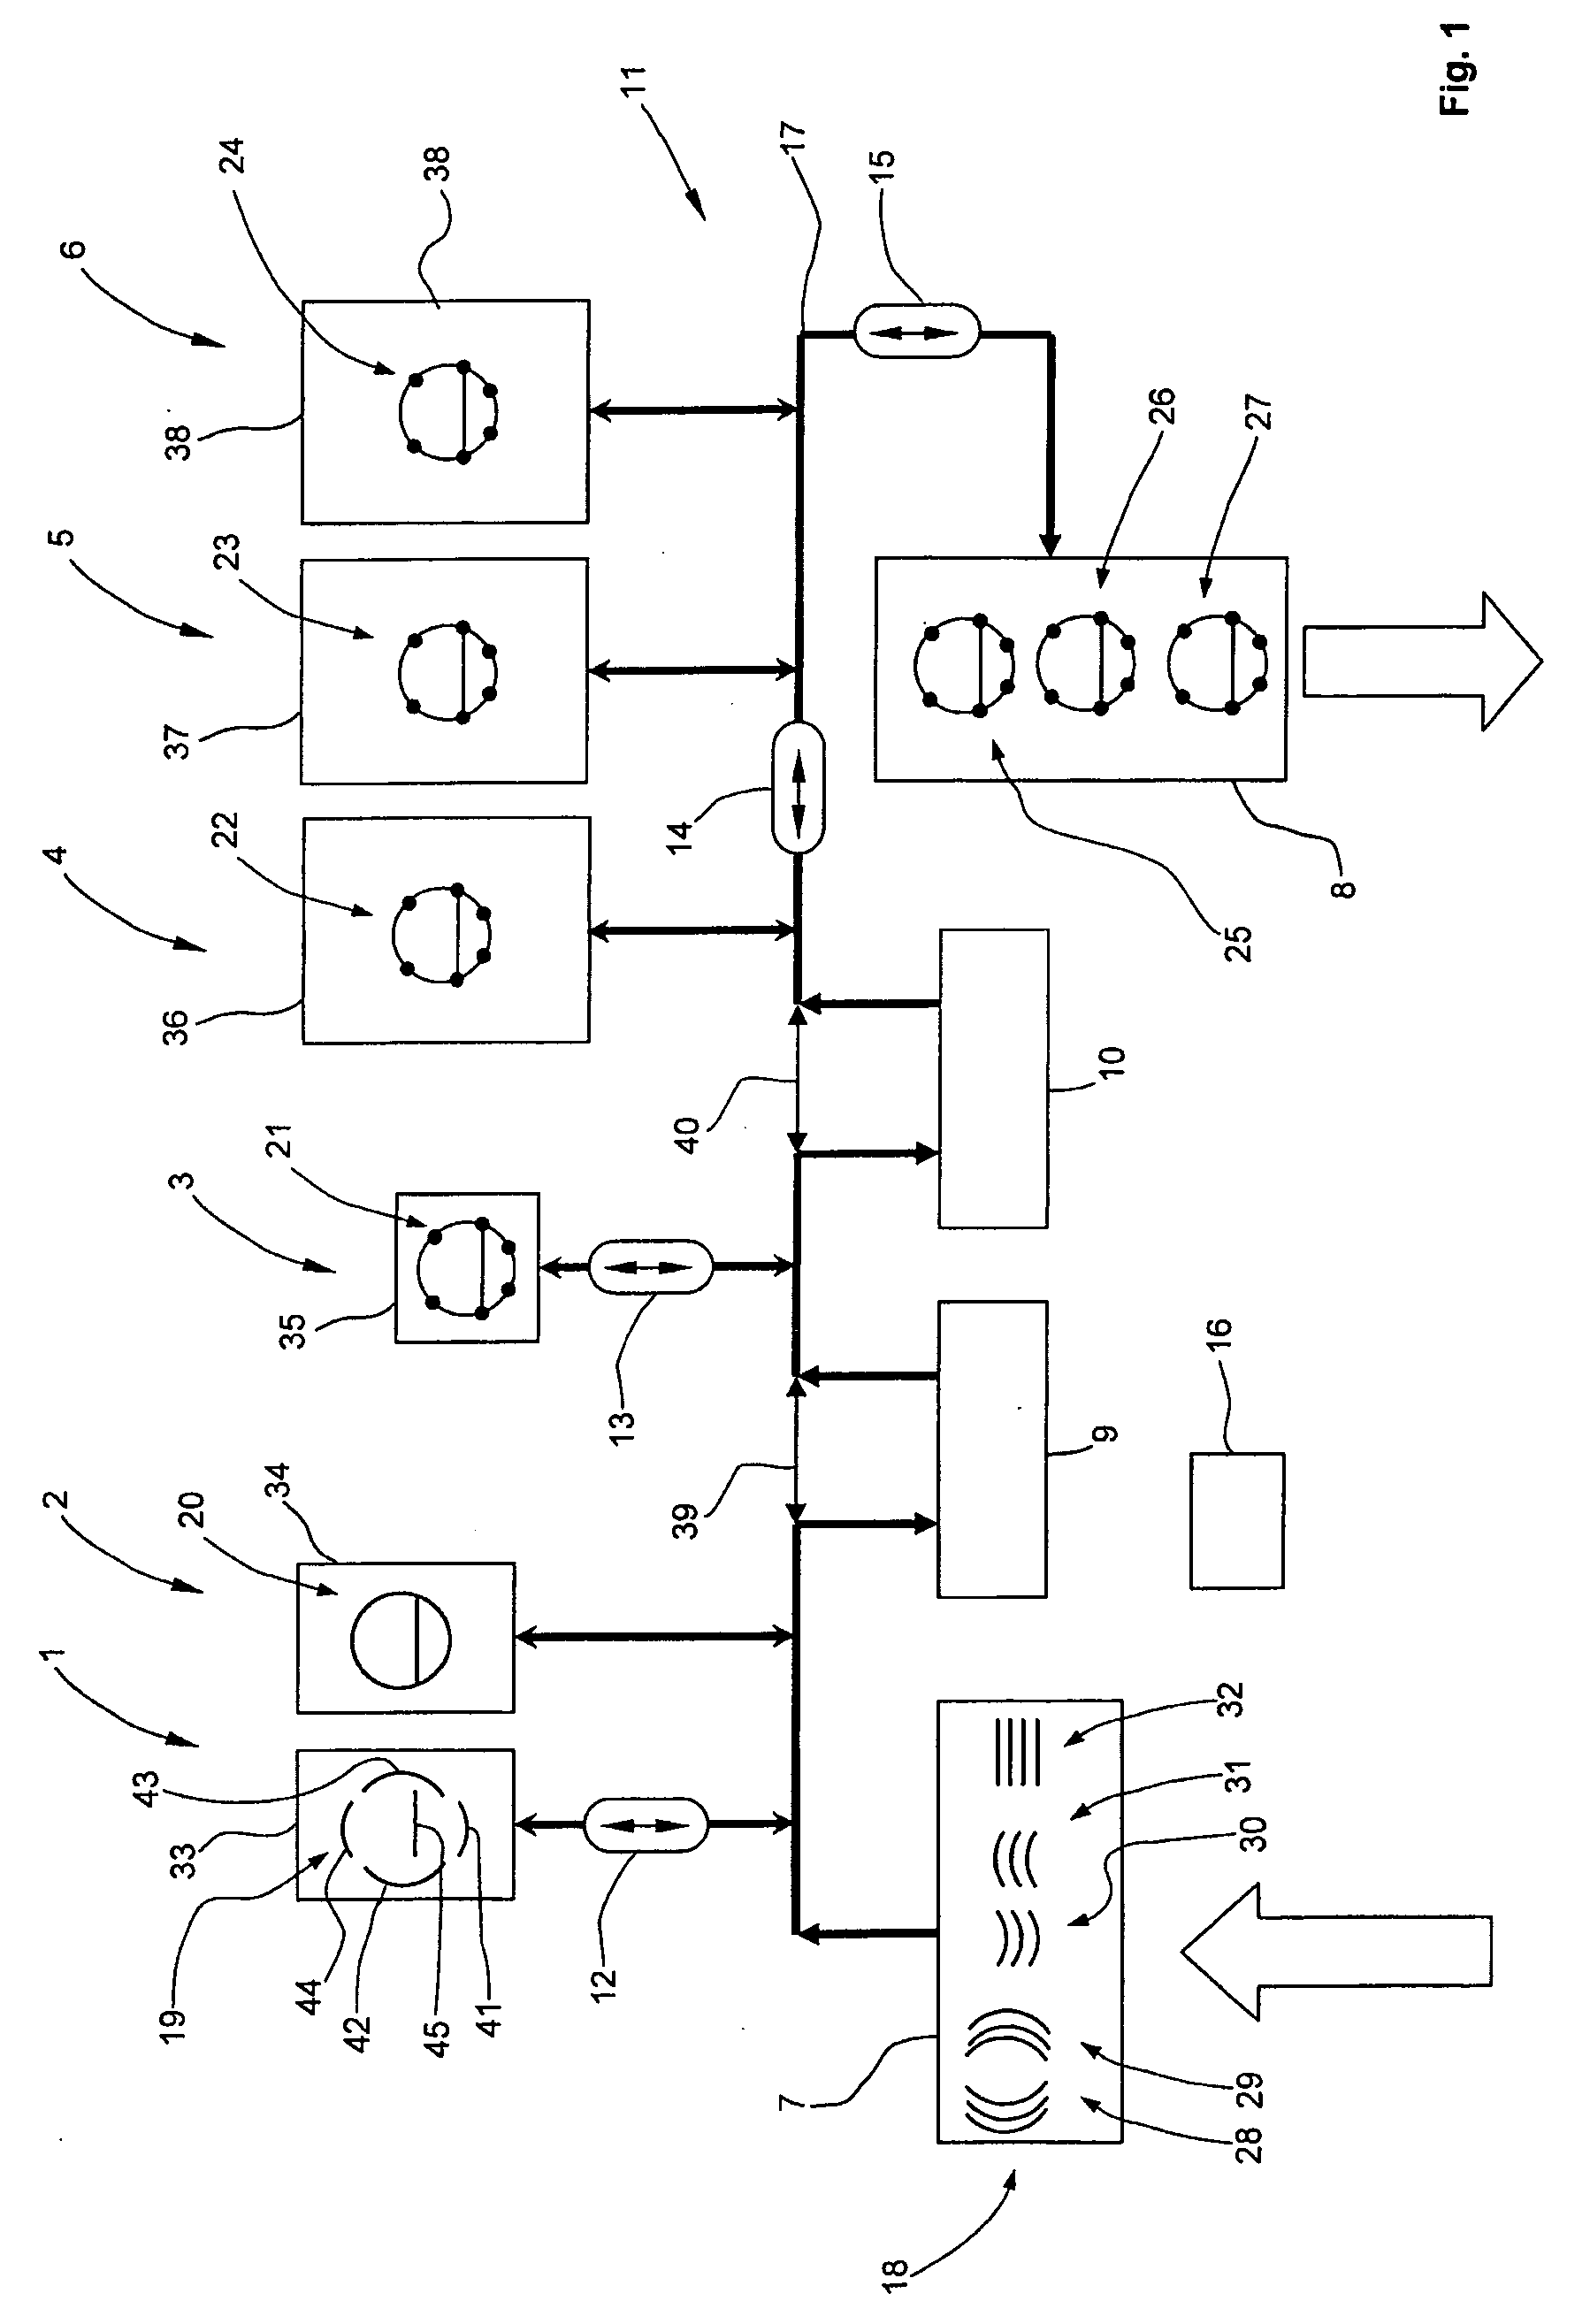 Method and device for manufacturing sections for transportation systems